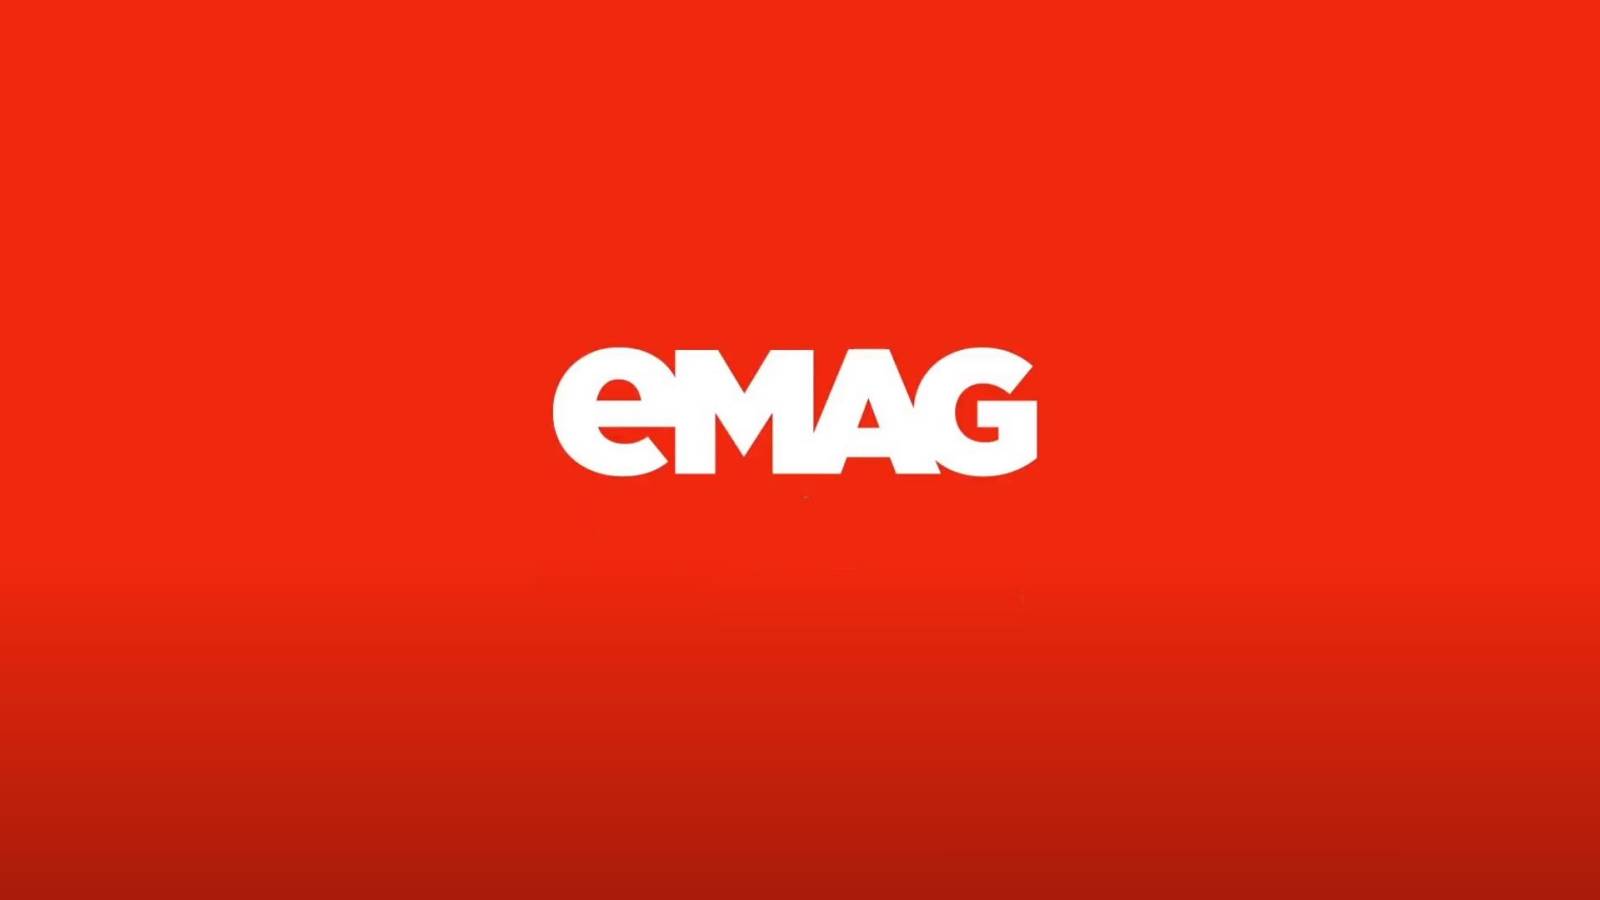 eMAG Offers SPECIAL DISCOUNTS